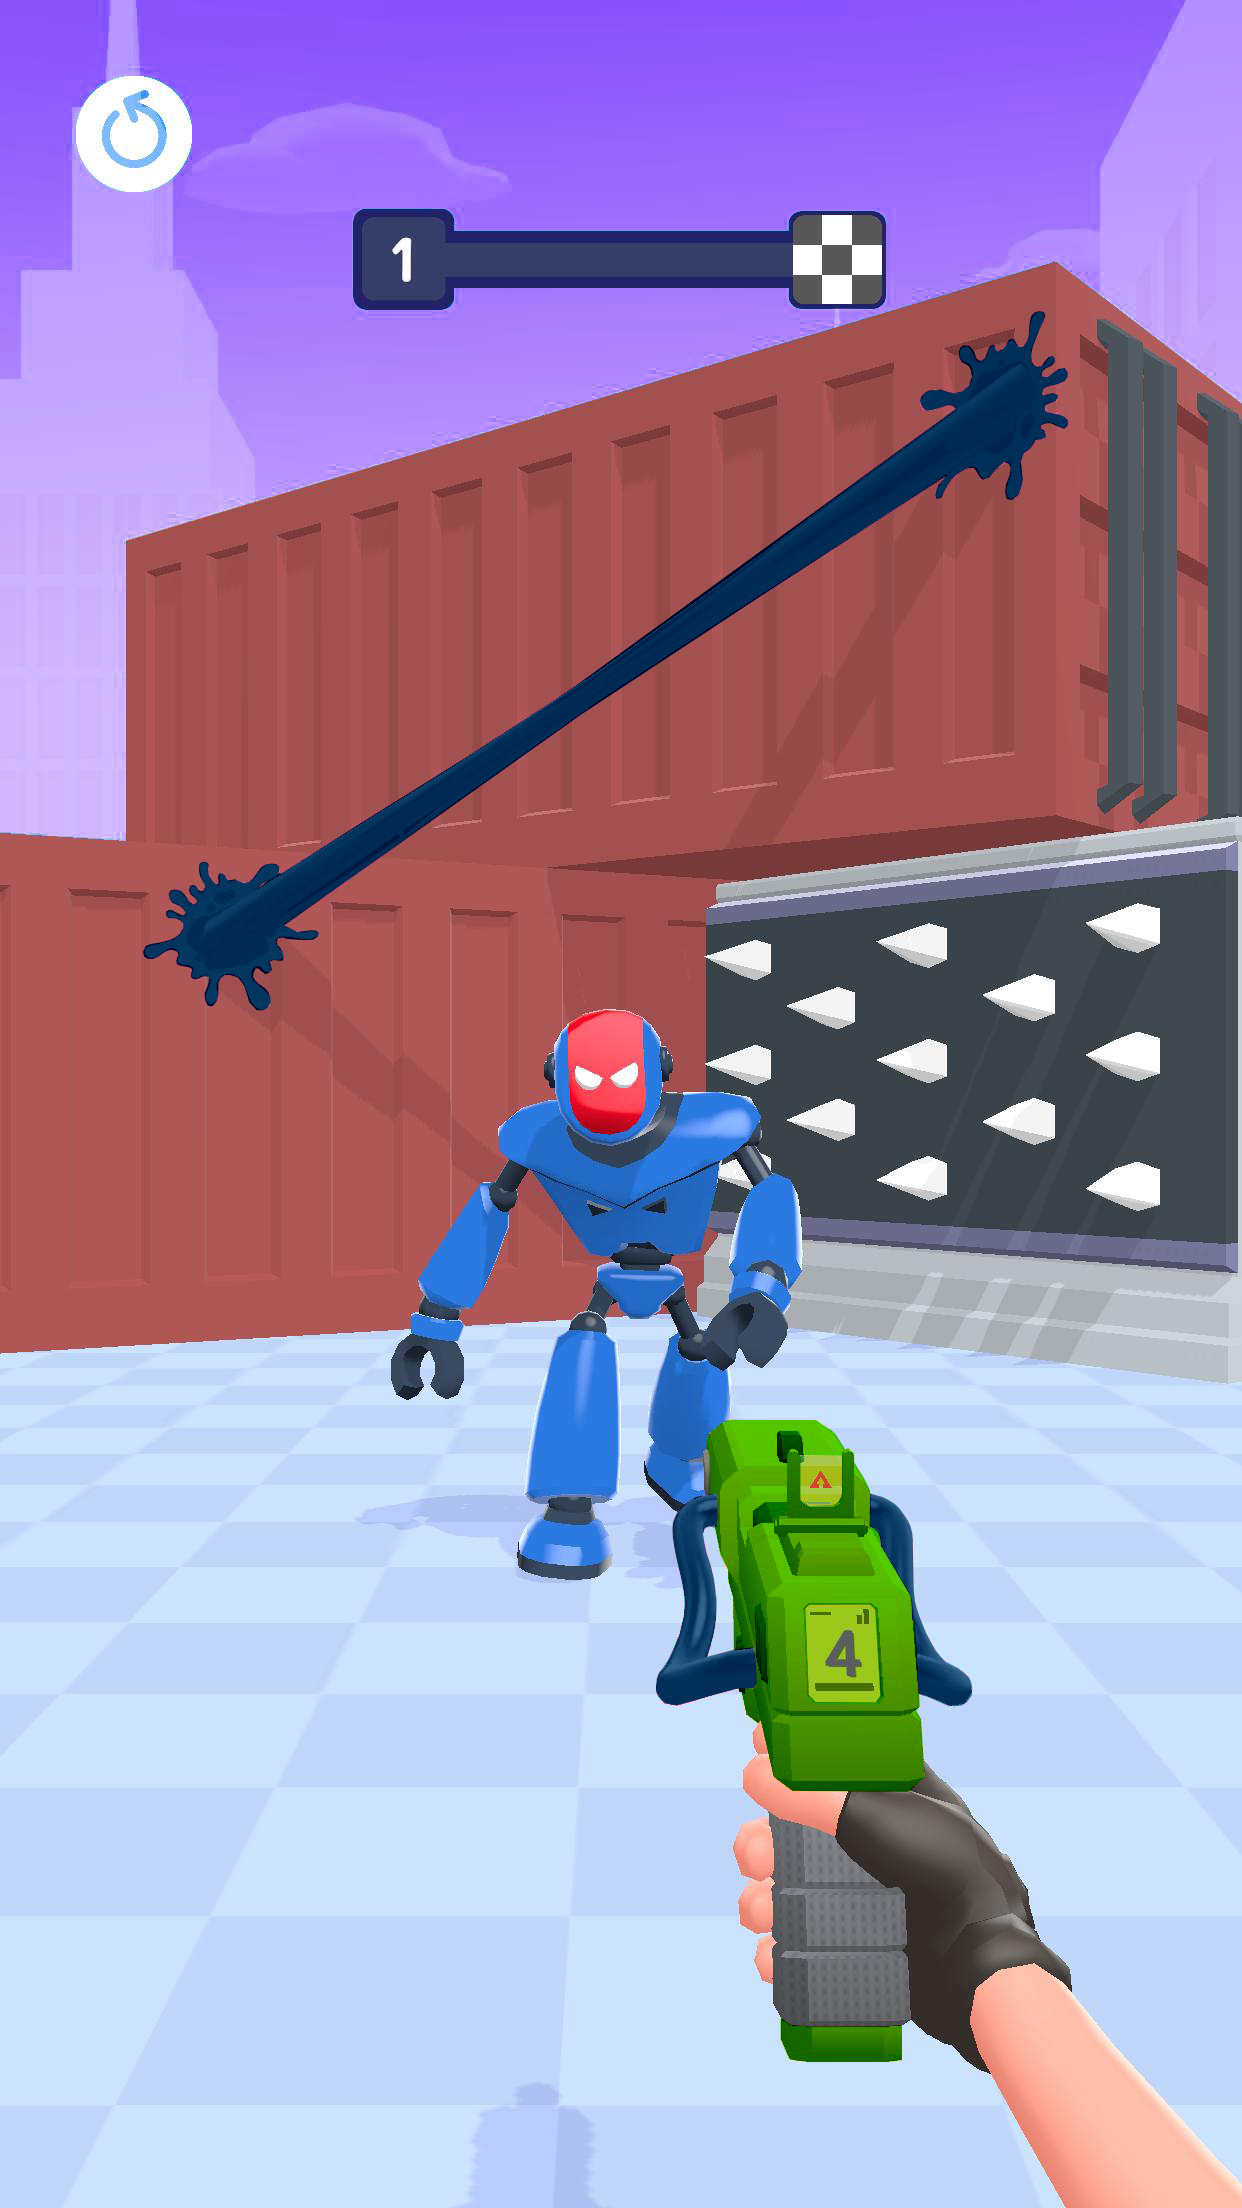 Play Tear Them All: Robot fighting Online